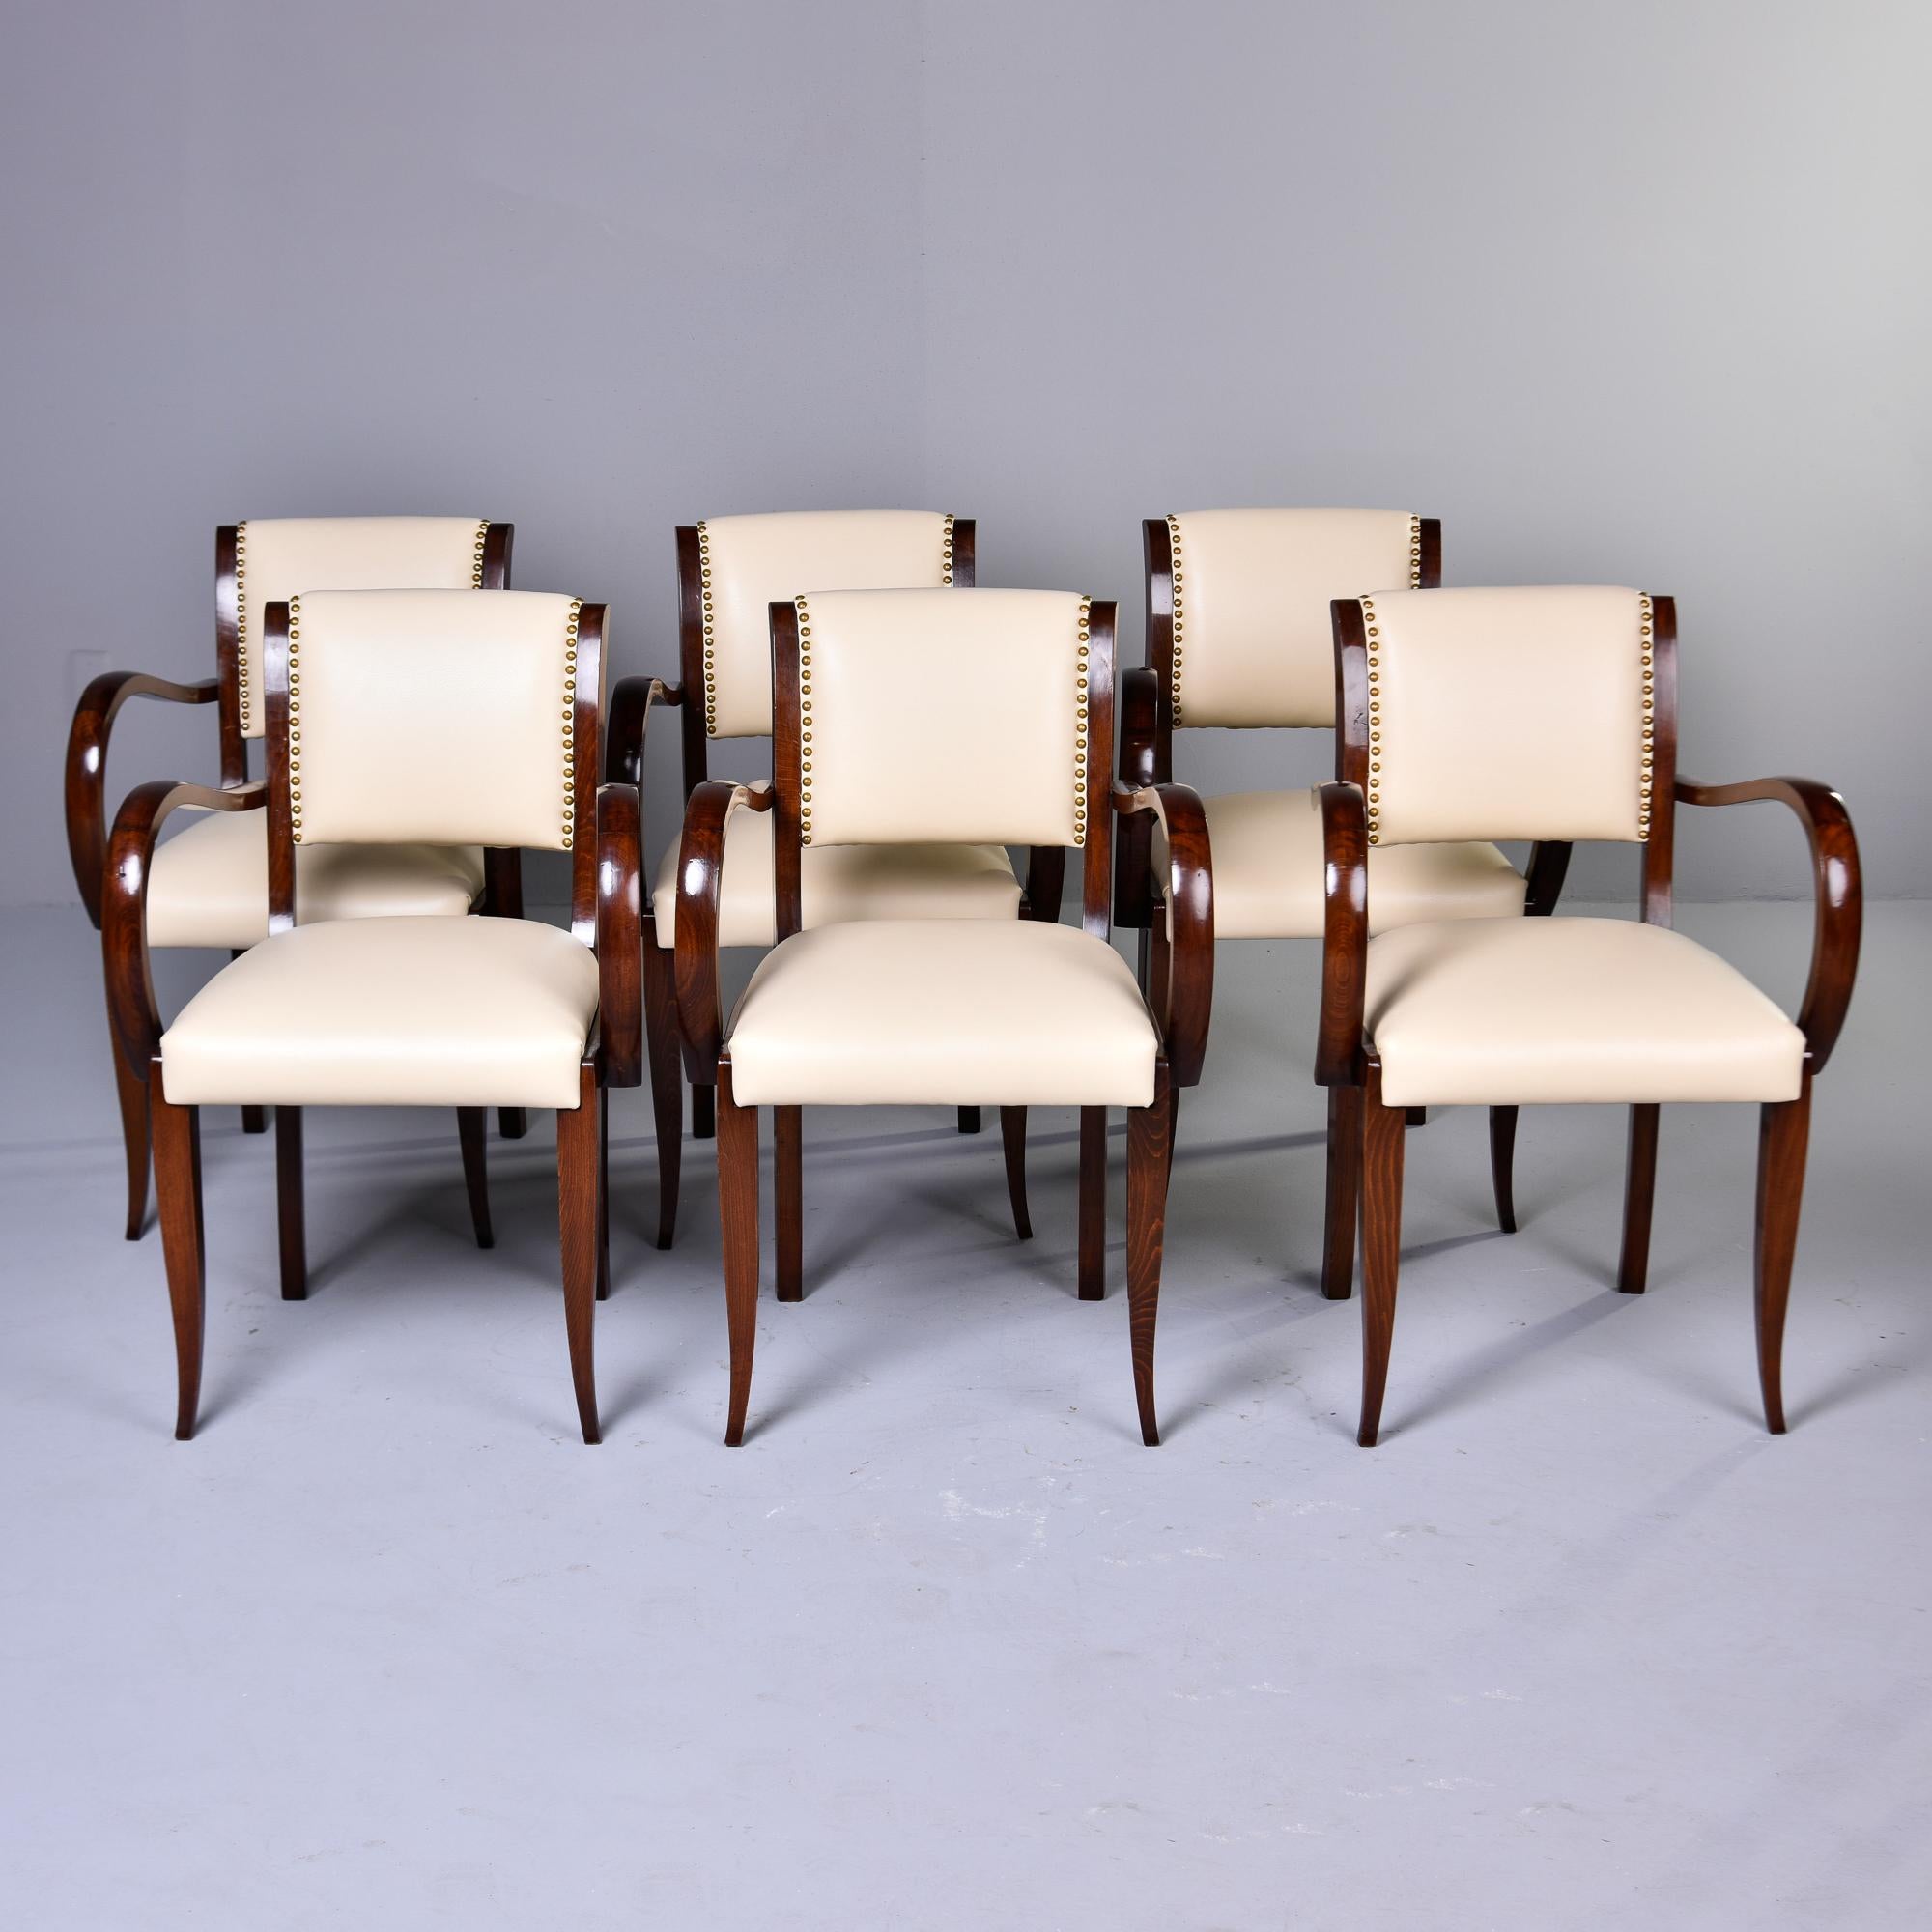 Found in France, this set of six chairs dates from the 1940s. Chairs have dark-stained walnut frames with tapered legs and dramatically curved arms. Upholstered seats and backs have been reupholstered in a creamy off-white leather. Seat backs have